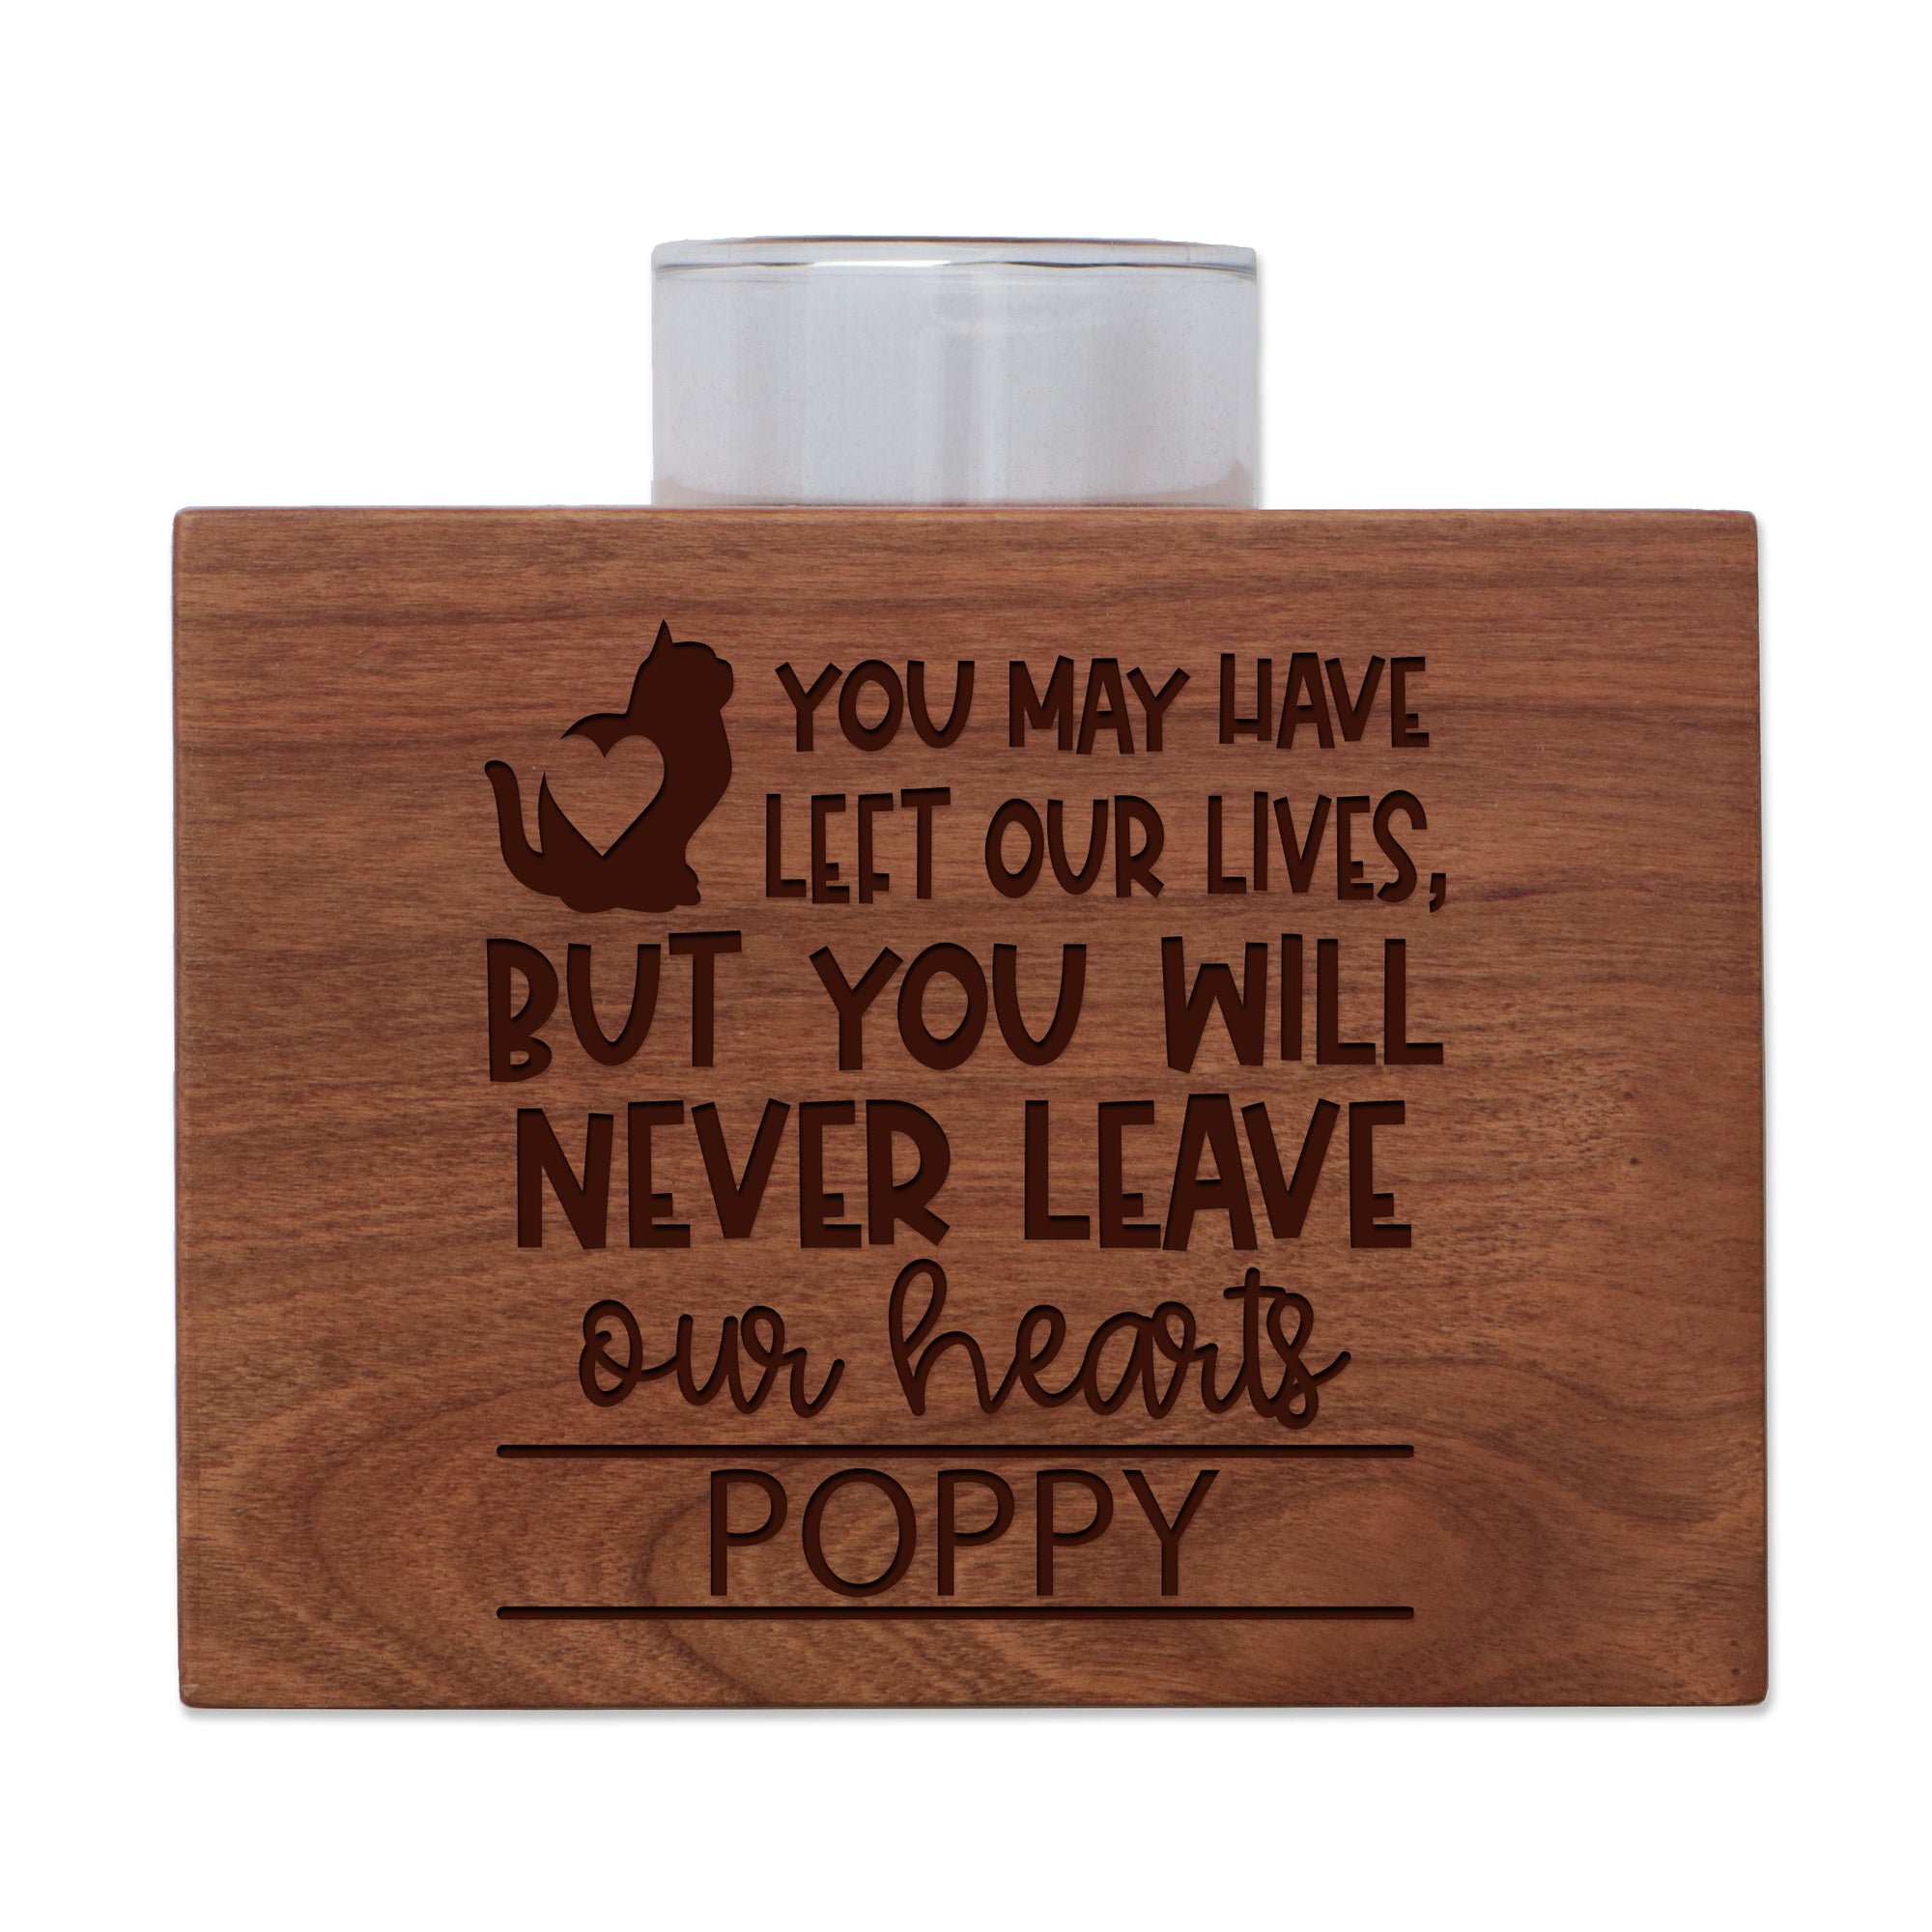 Pet Memorial Single Candle Holder - You May Have Left Our Lives (Cat)